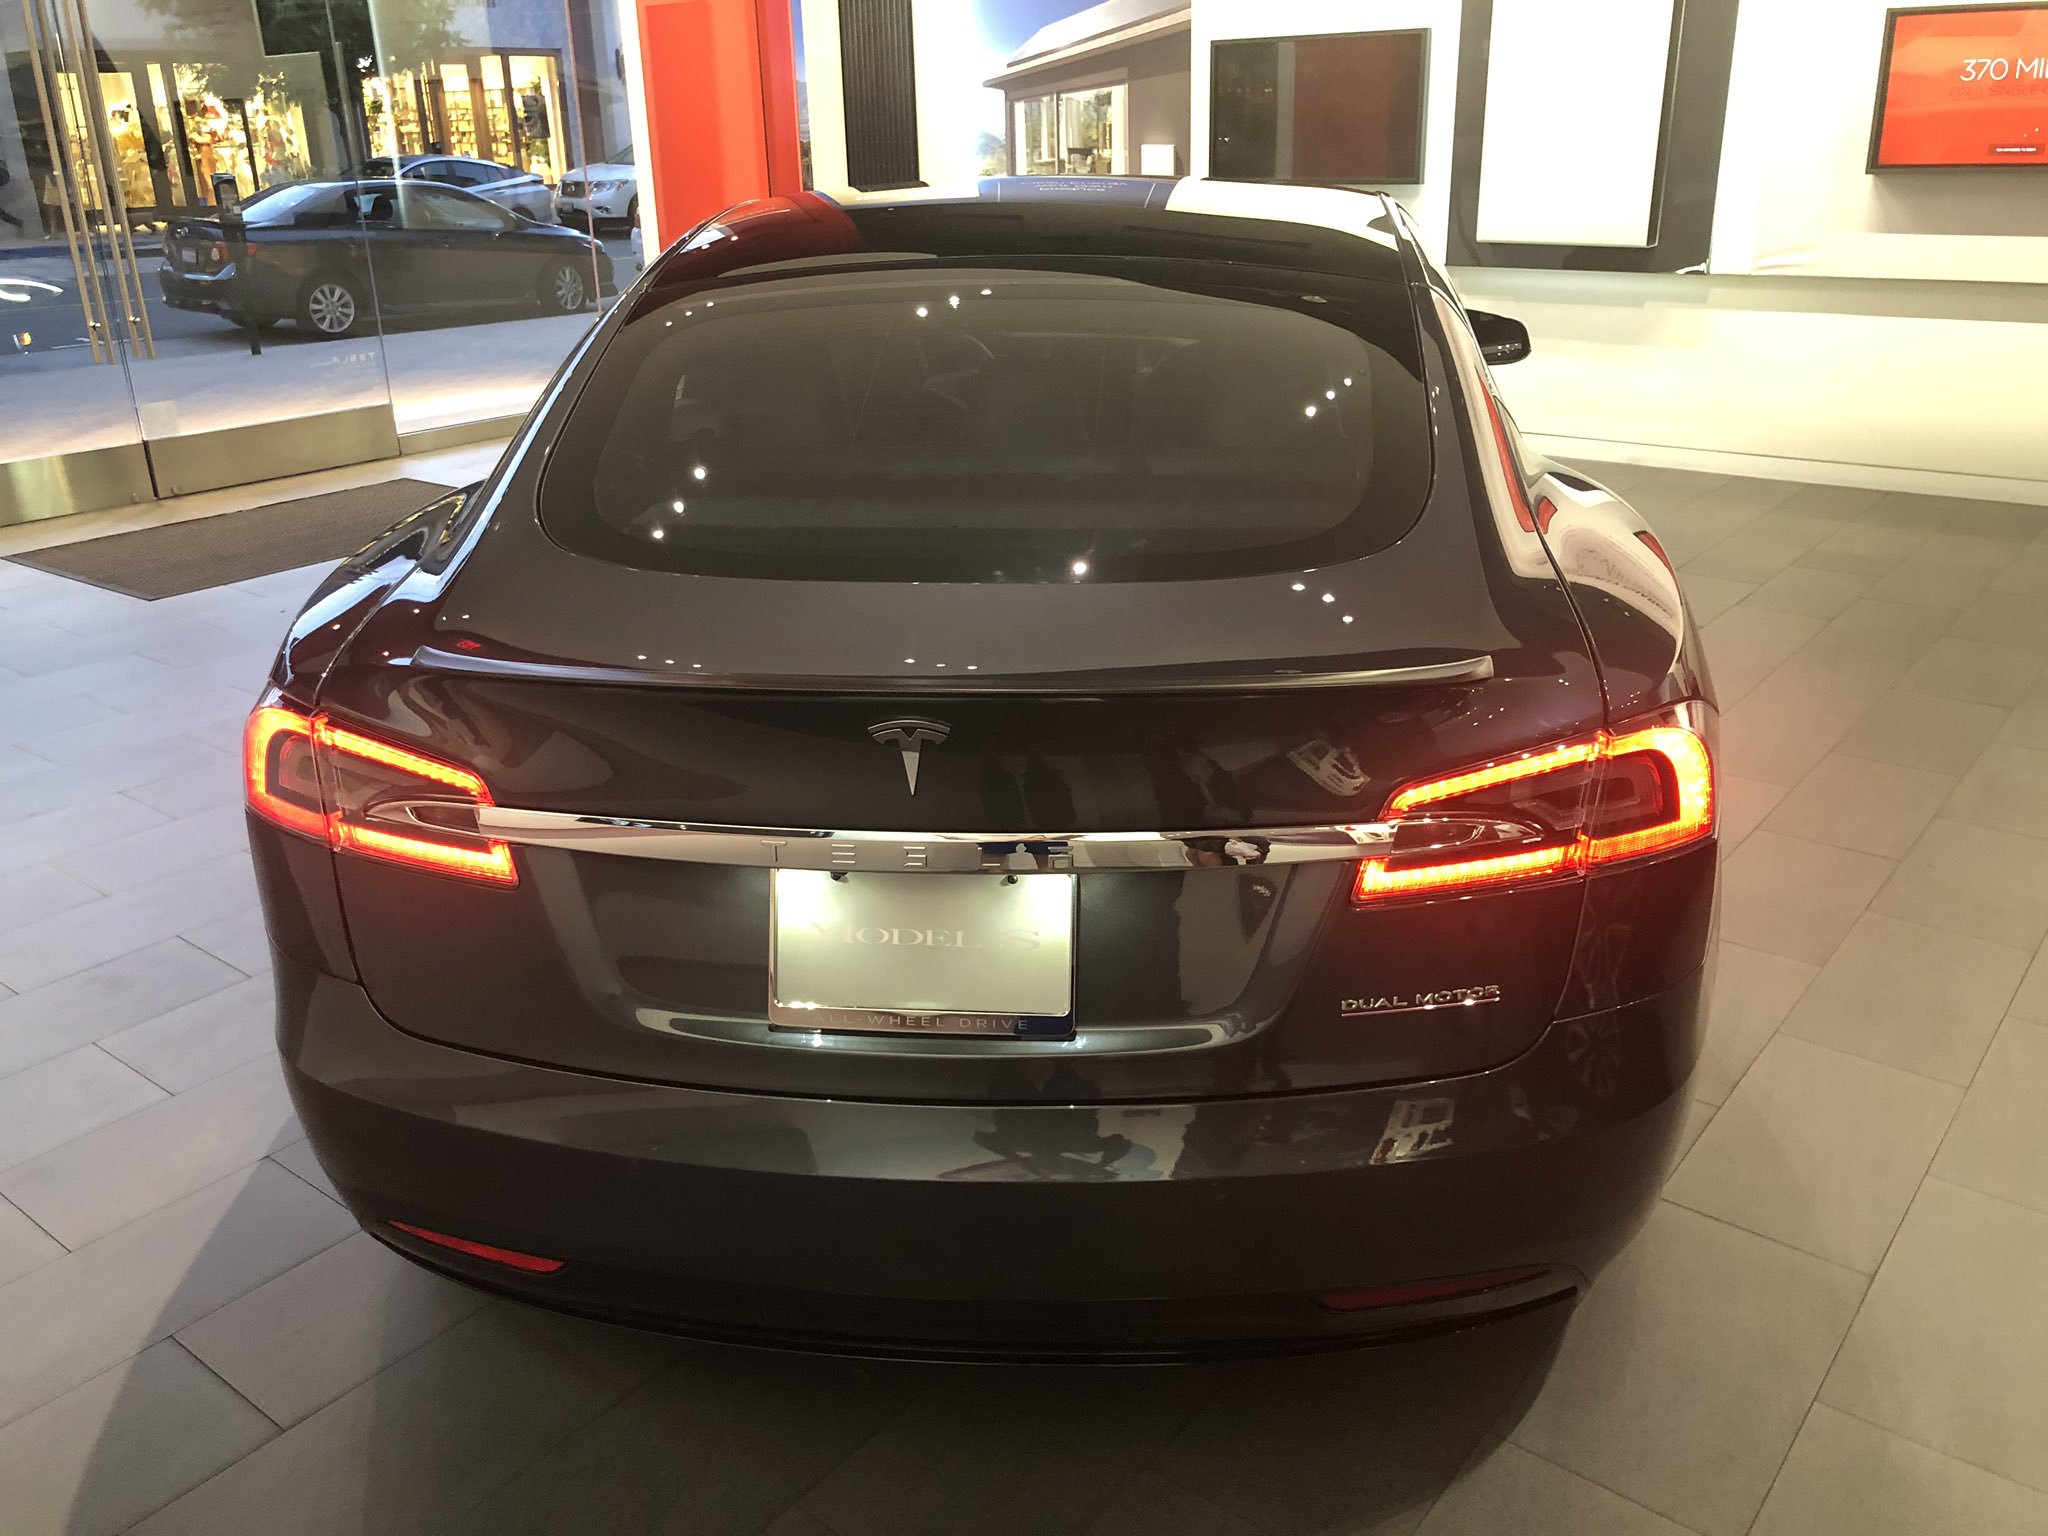 Driving A Tesla Model S Is Risky It May Lead To Addiction